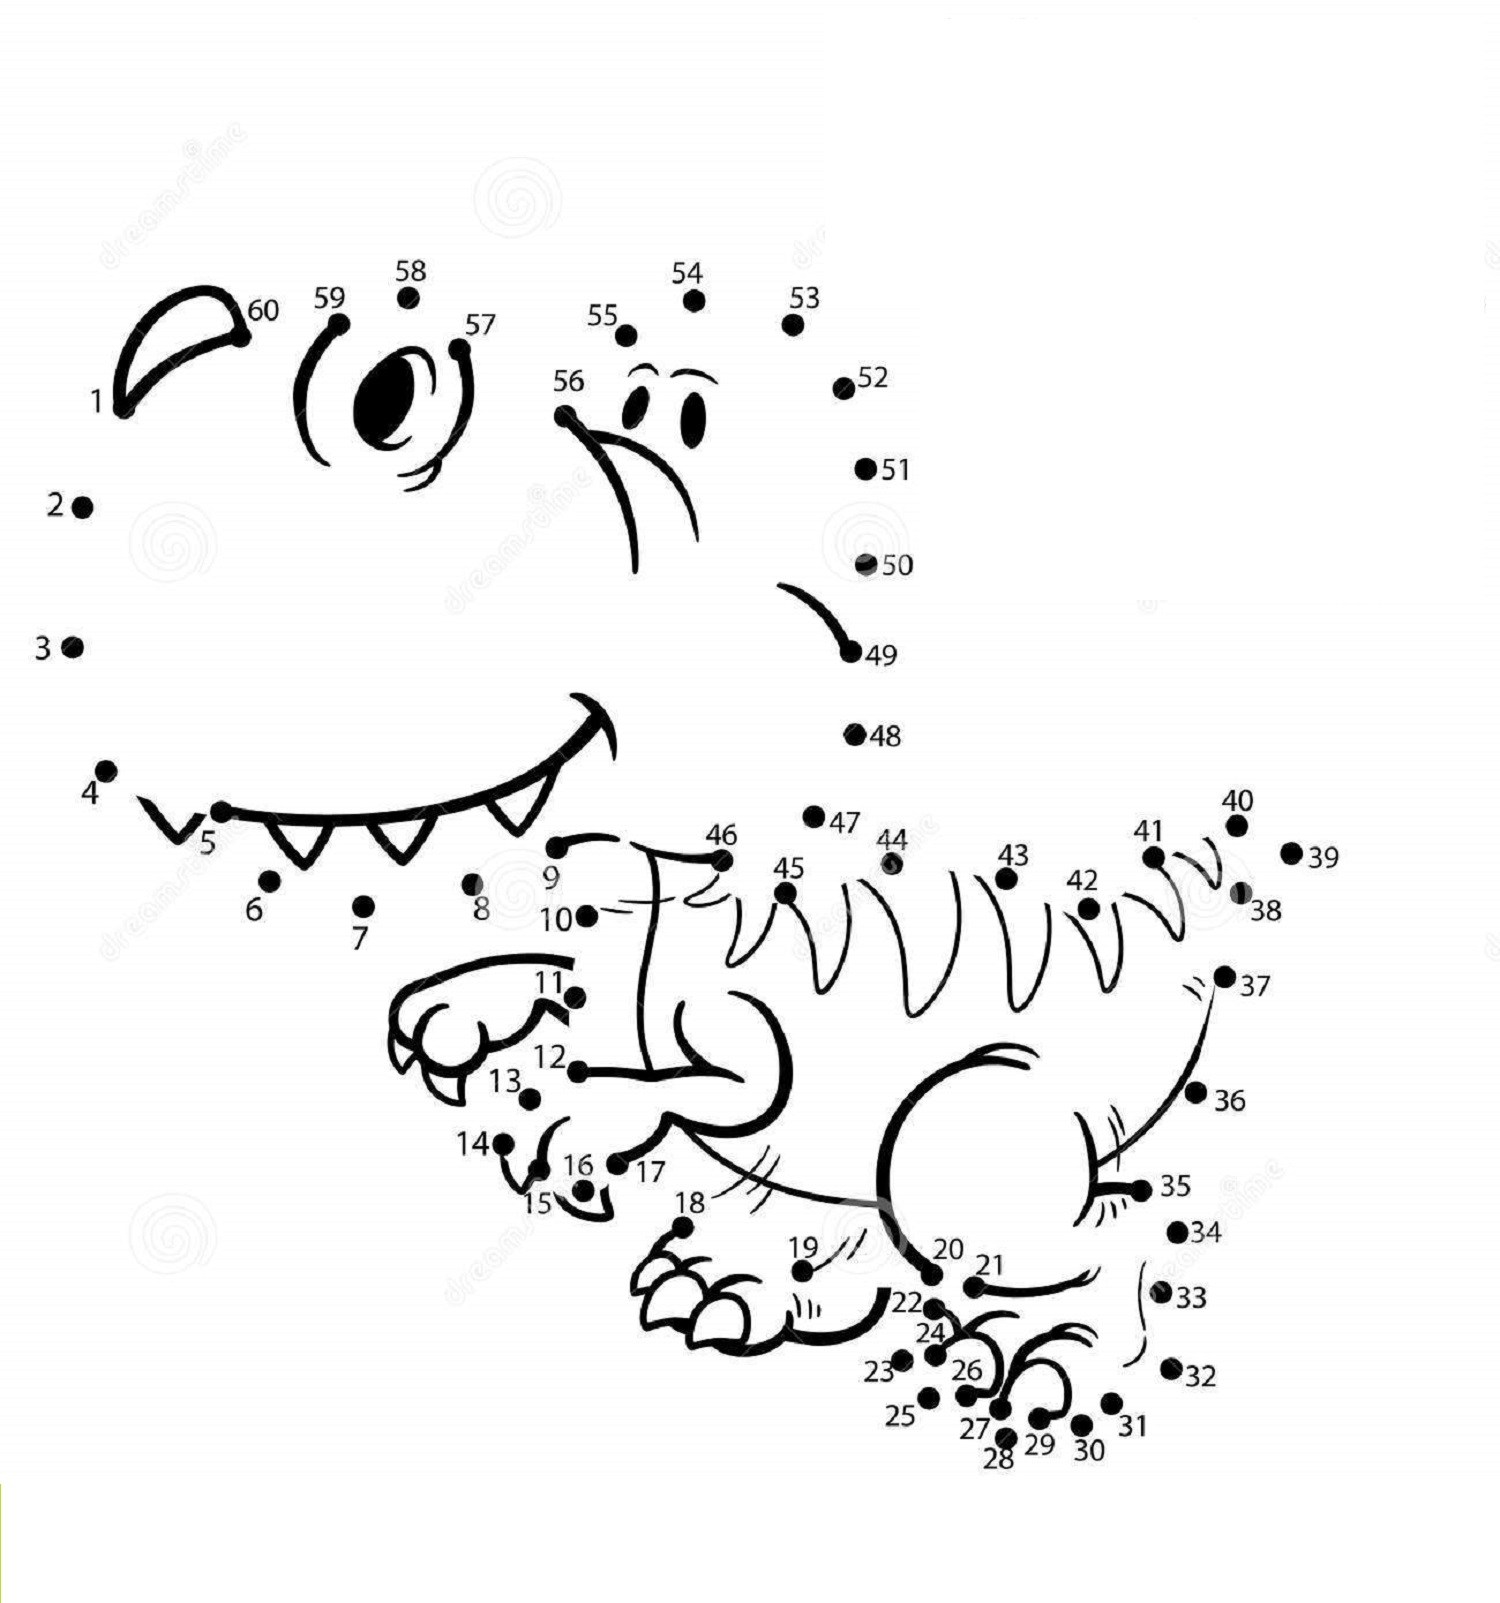 dinosaur-dot-to-dot-coloring-pages-coloring-home